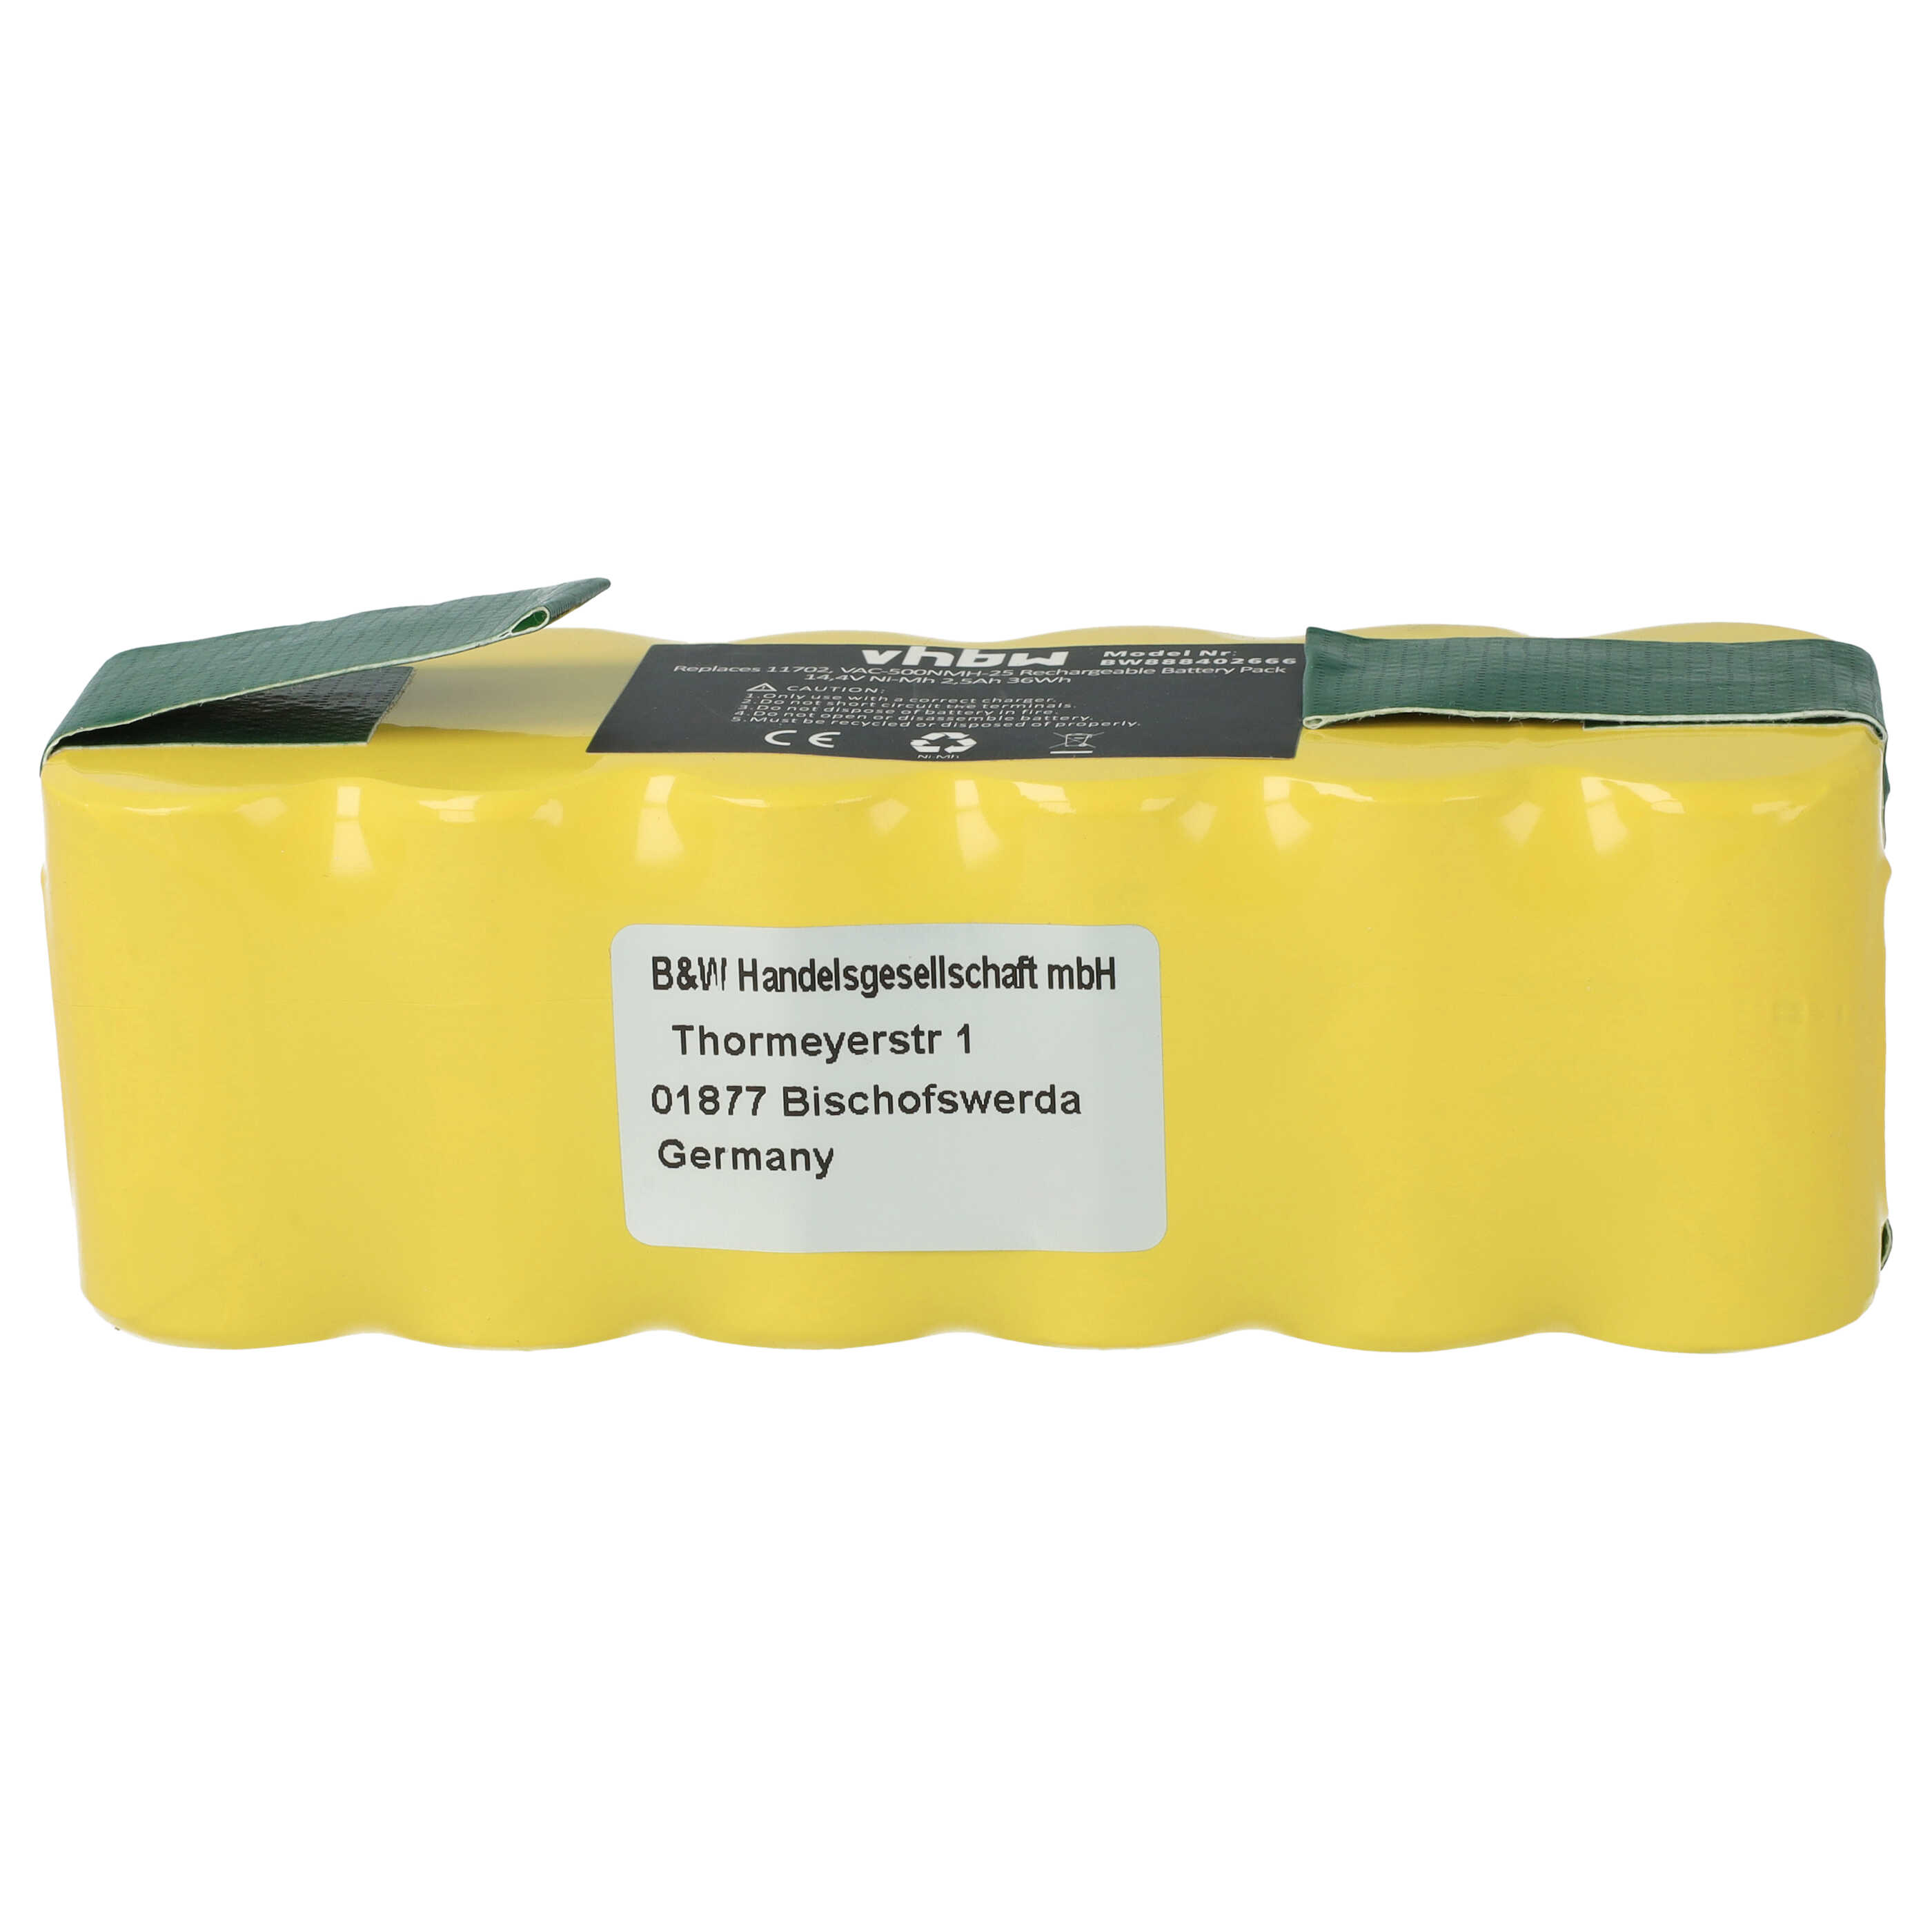 Battery Replacement for 80501e, 80601, 11702, 68939, 80501, 855714, 4419696 for - 2500mAh, 14.4V, NiMH